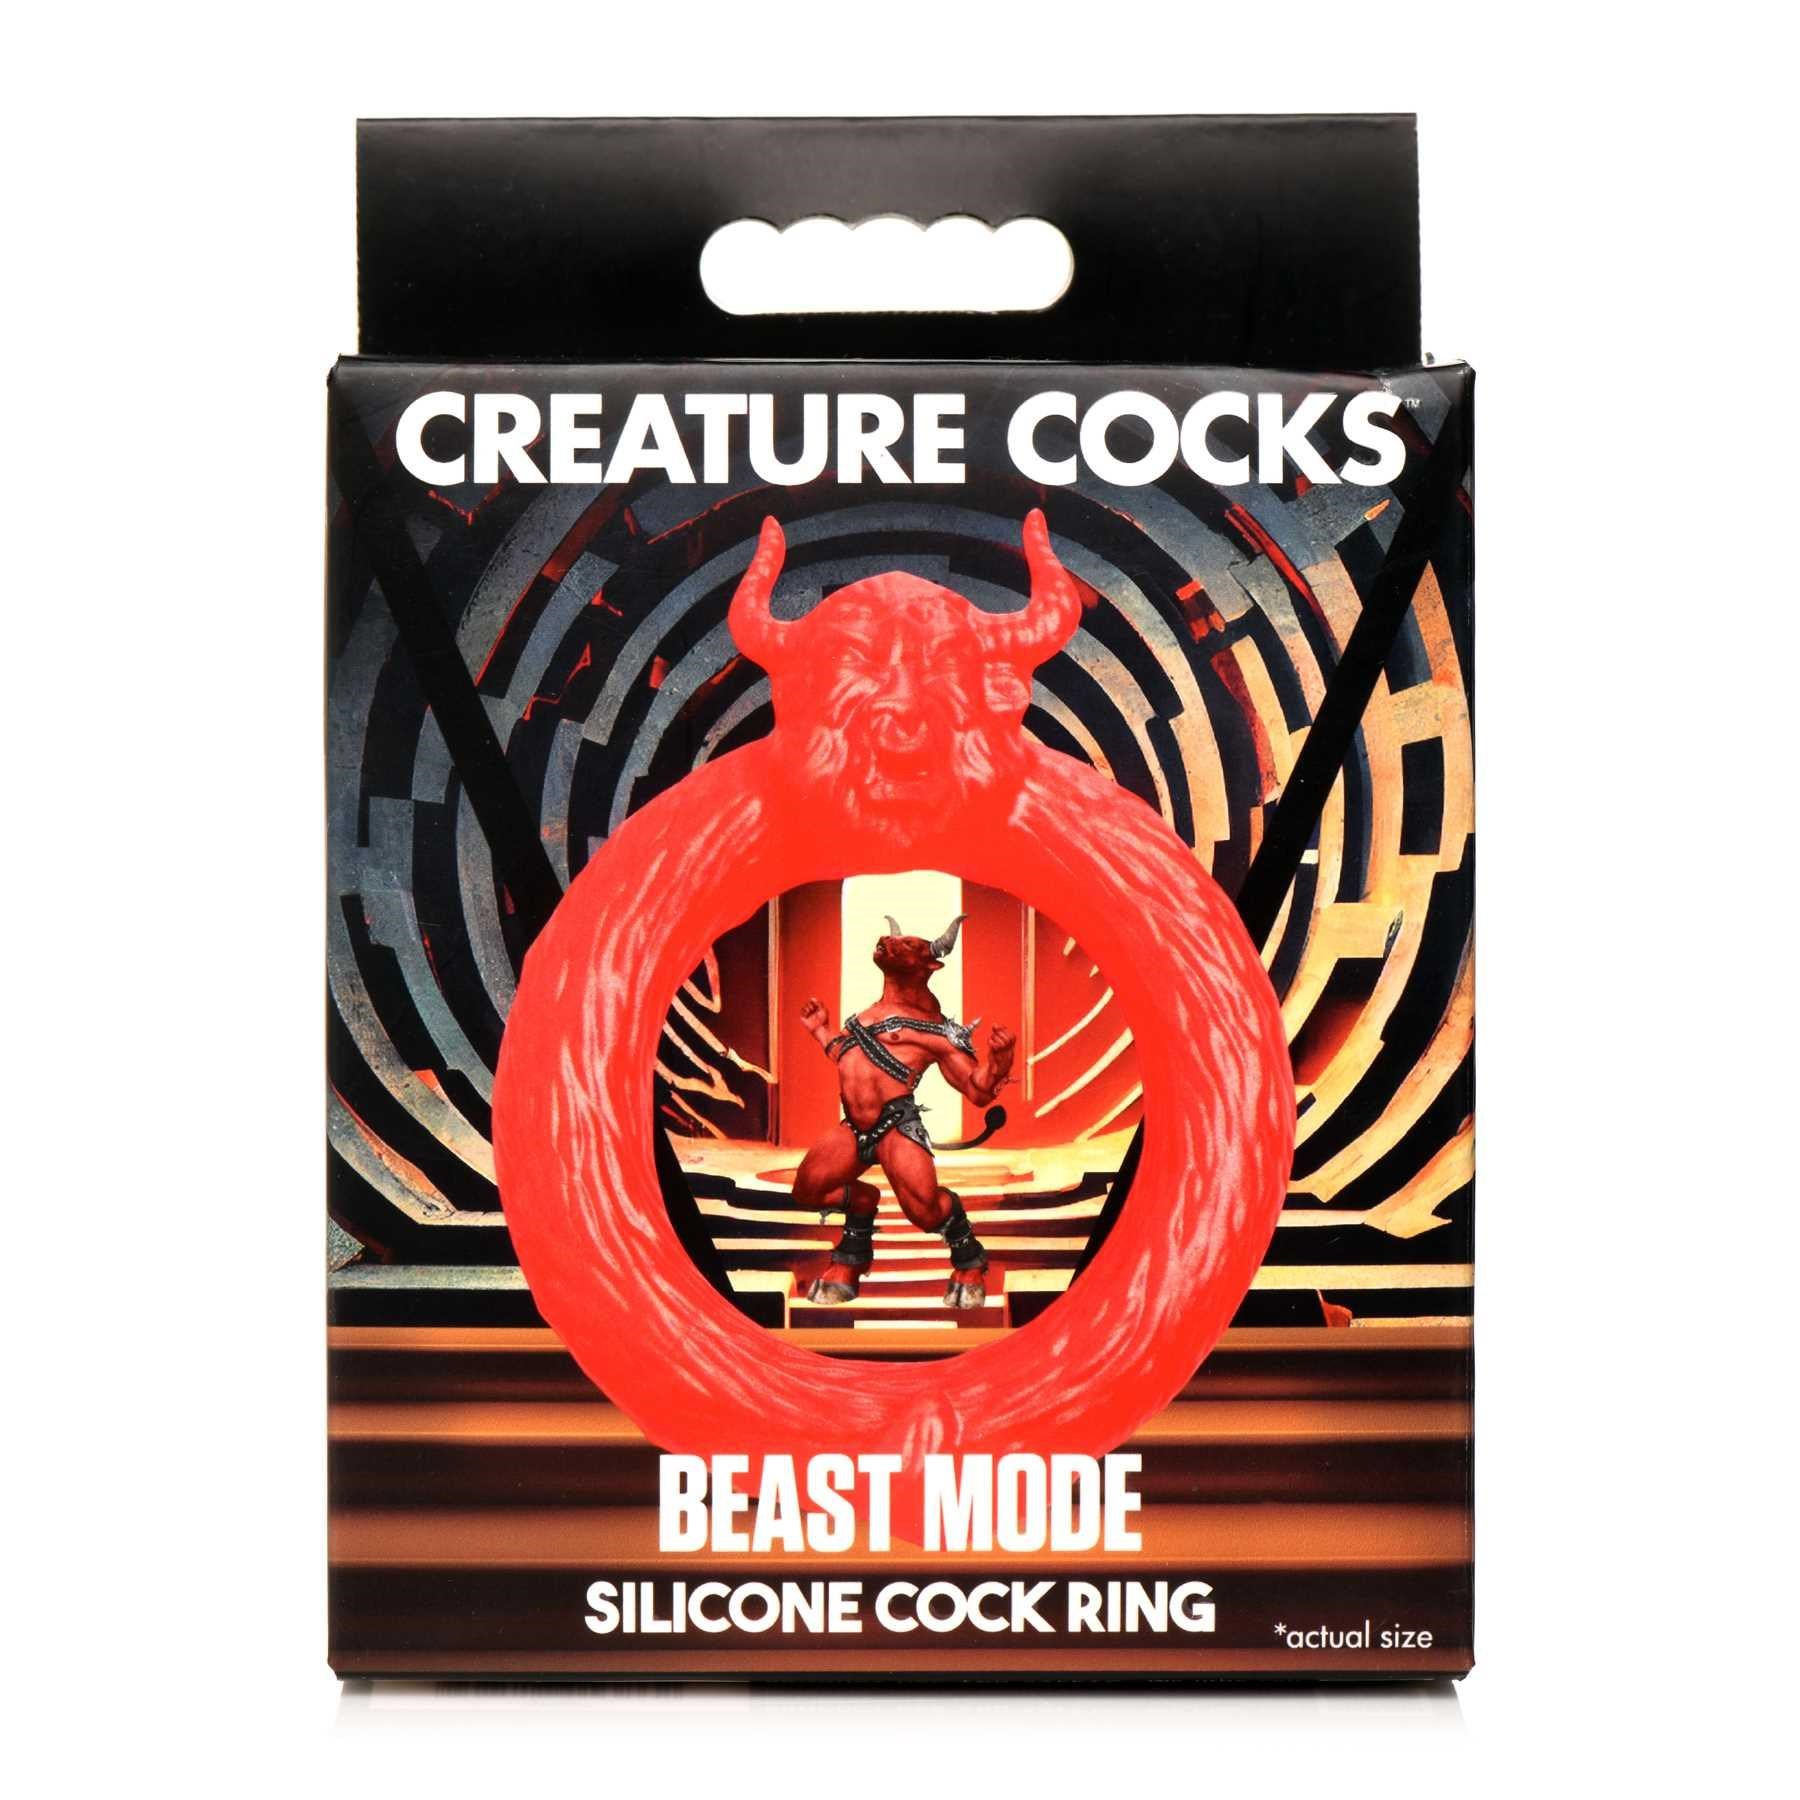 Creature Cocks Minotaur Silicone Cock Ring packaging